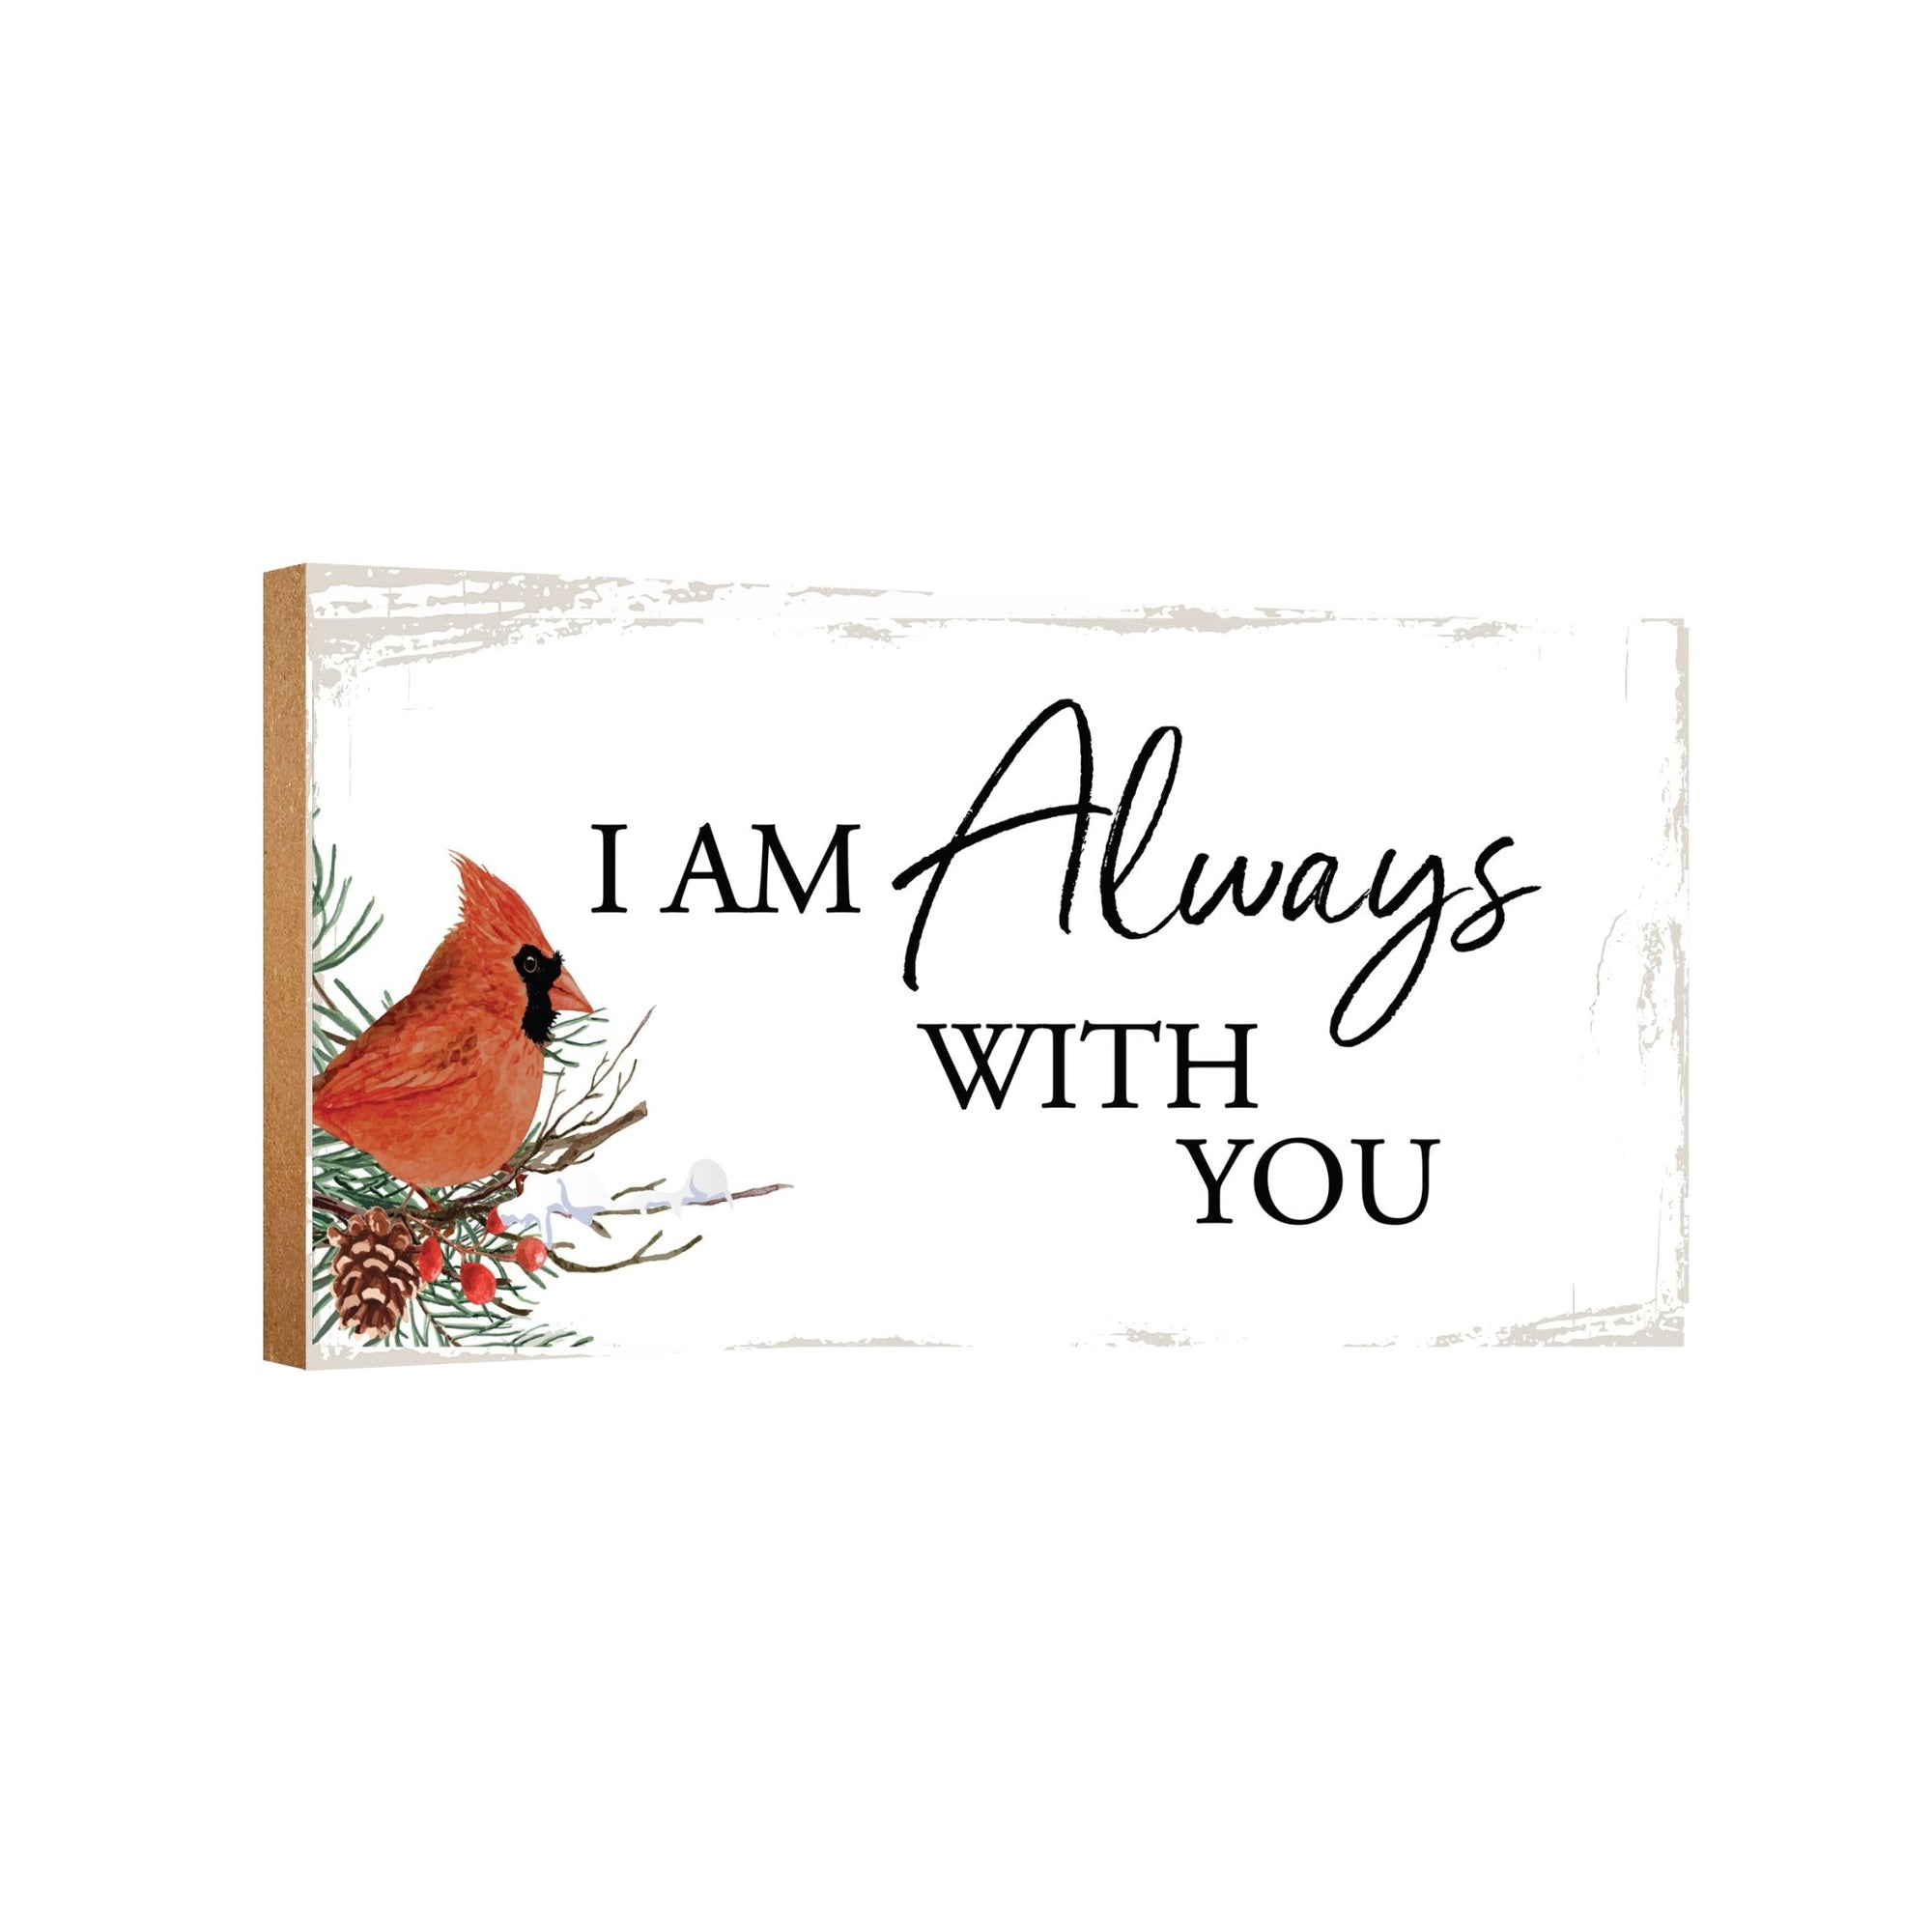 An elegant wooden memorial wall plaque adorned with a cardinal, designed to honor and cherish the memory of your loved one.